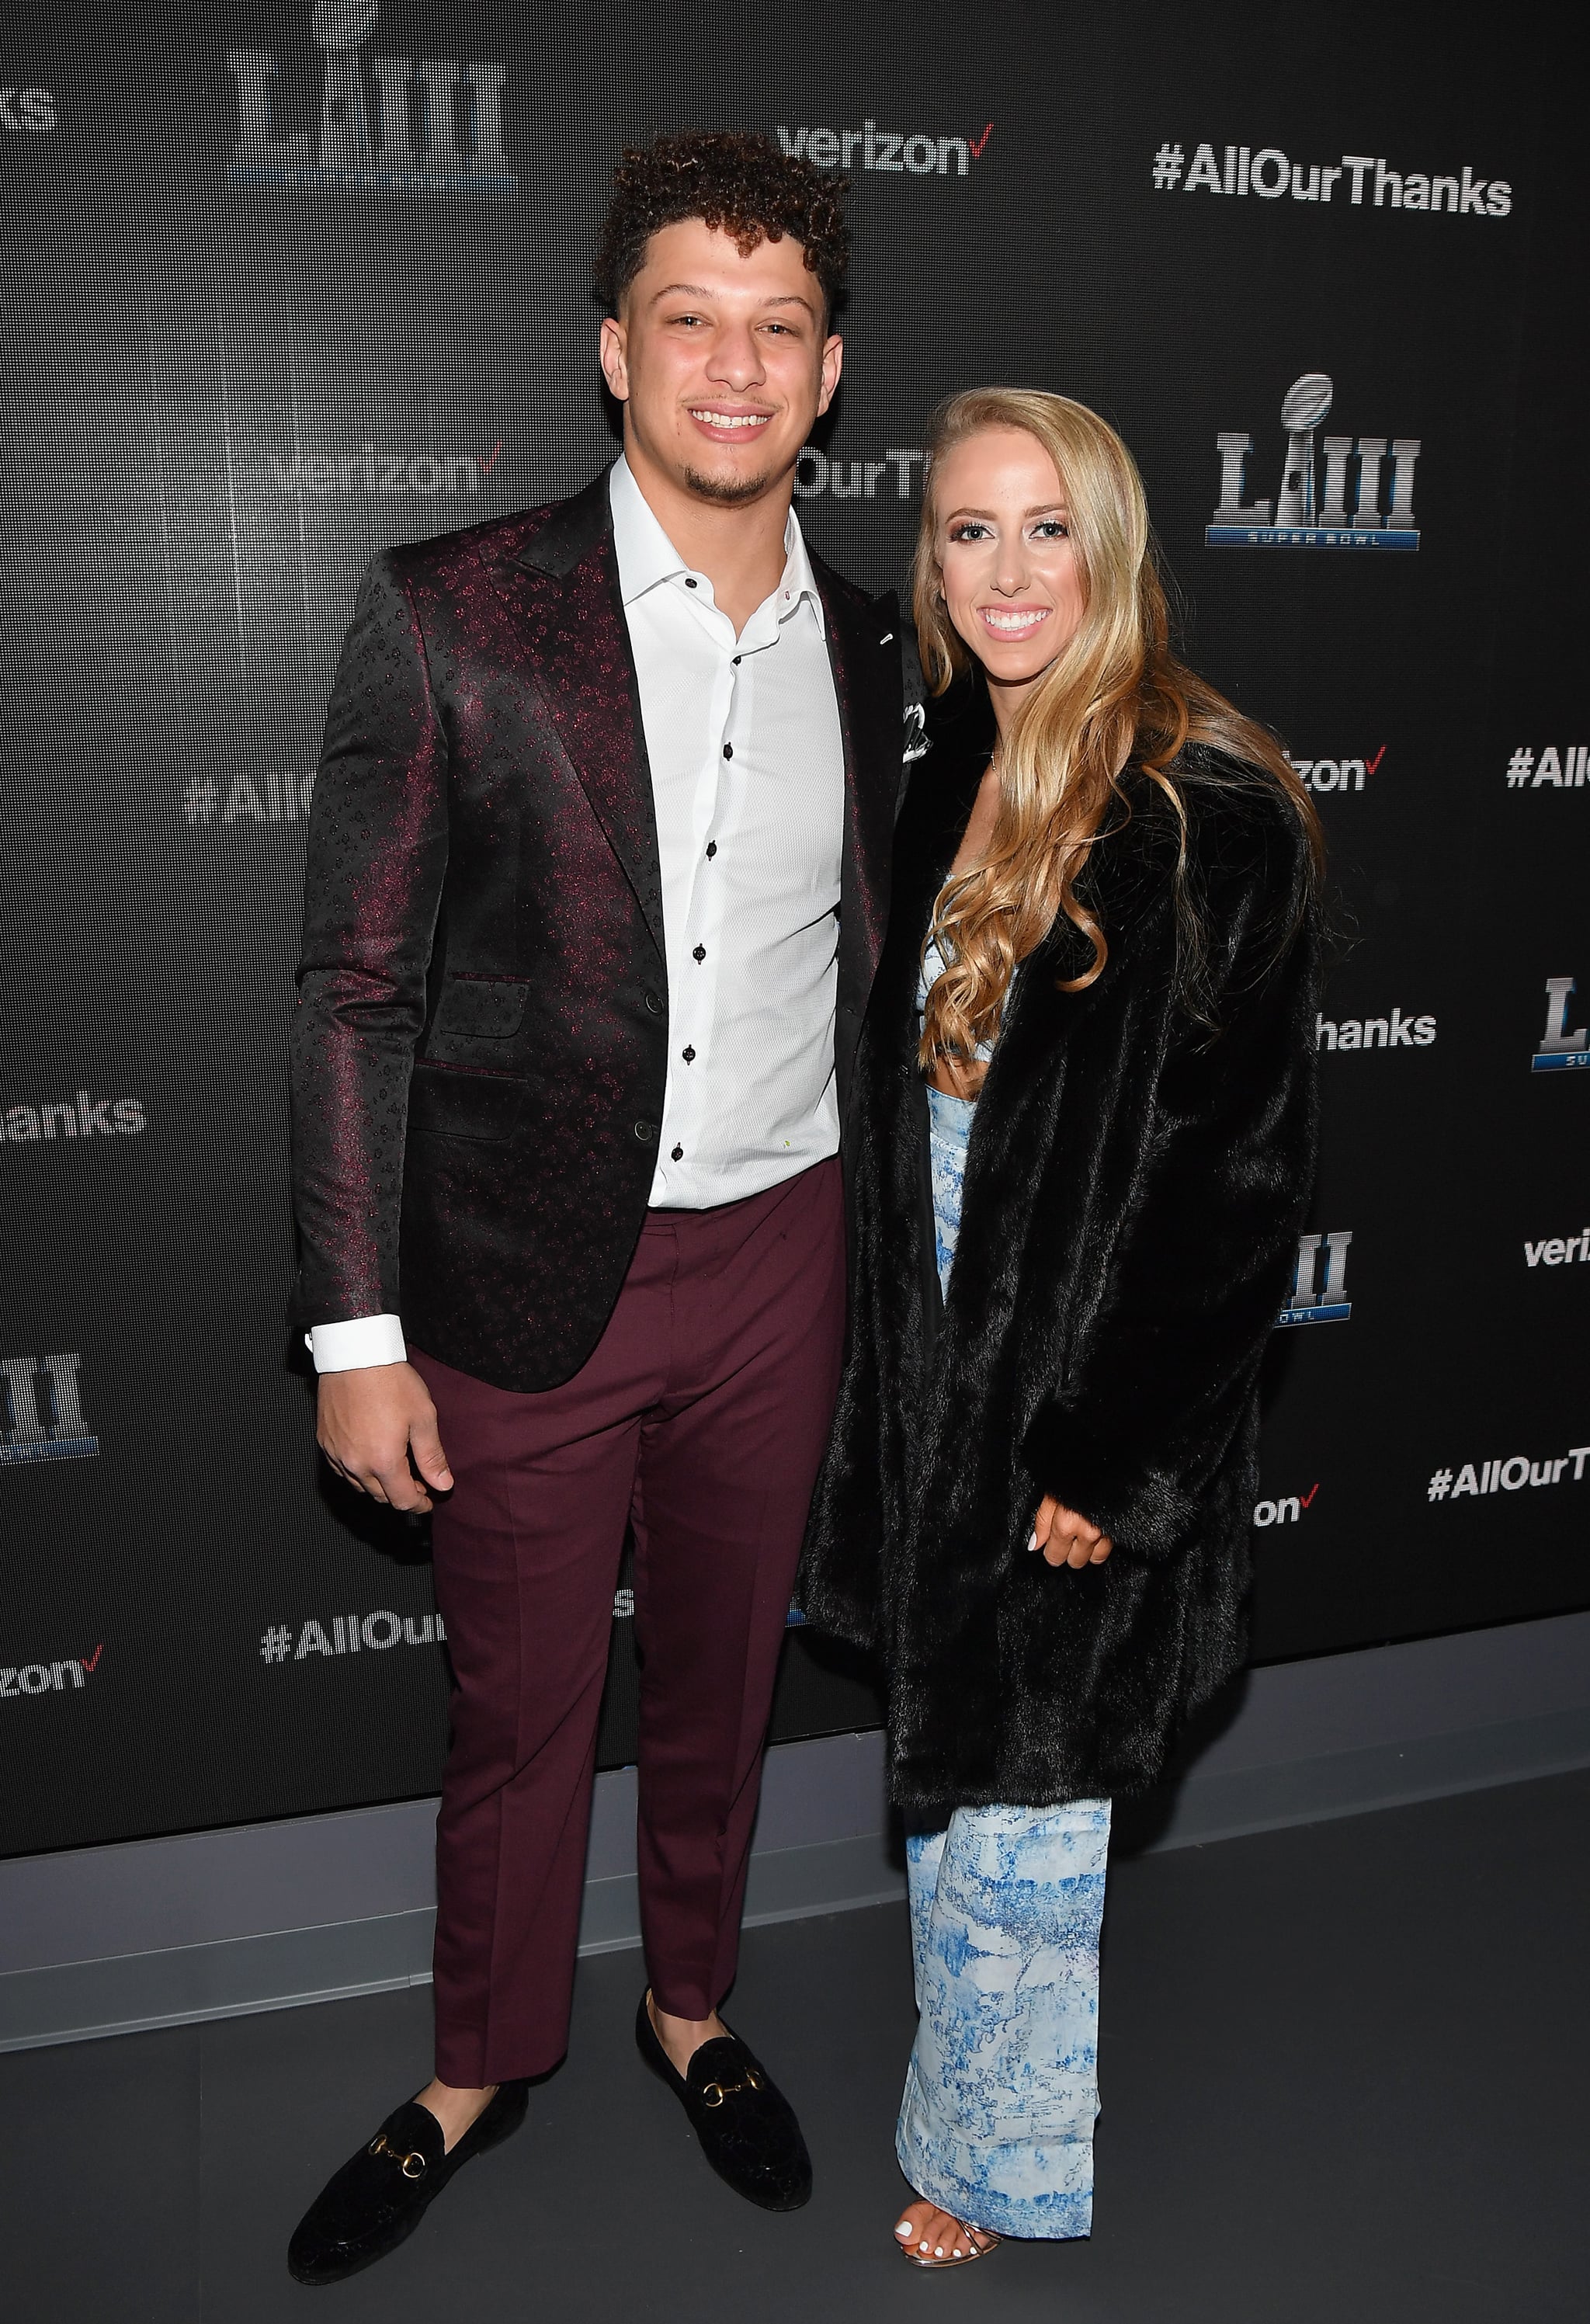 ATLANTA, GEORGIA - JANUARY 31: Patrick Mahomes II and Brittany Matthews attend the world premiere event for 